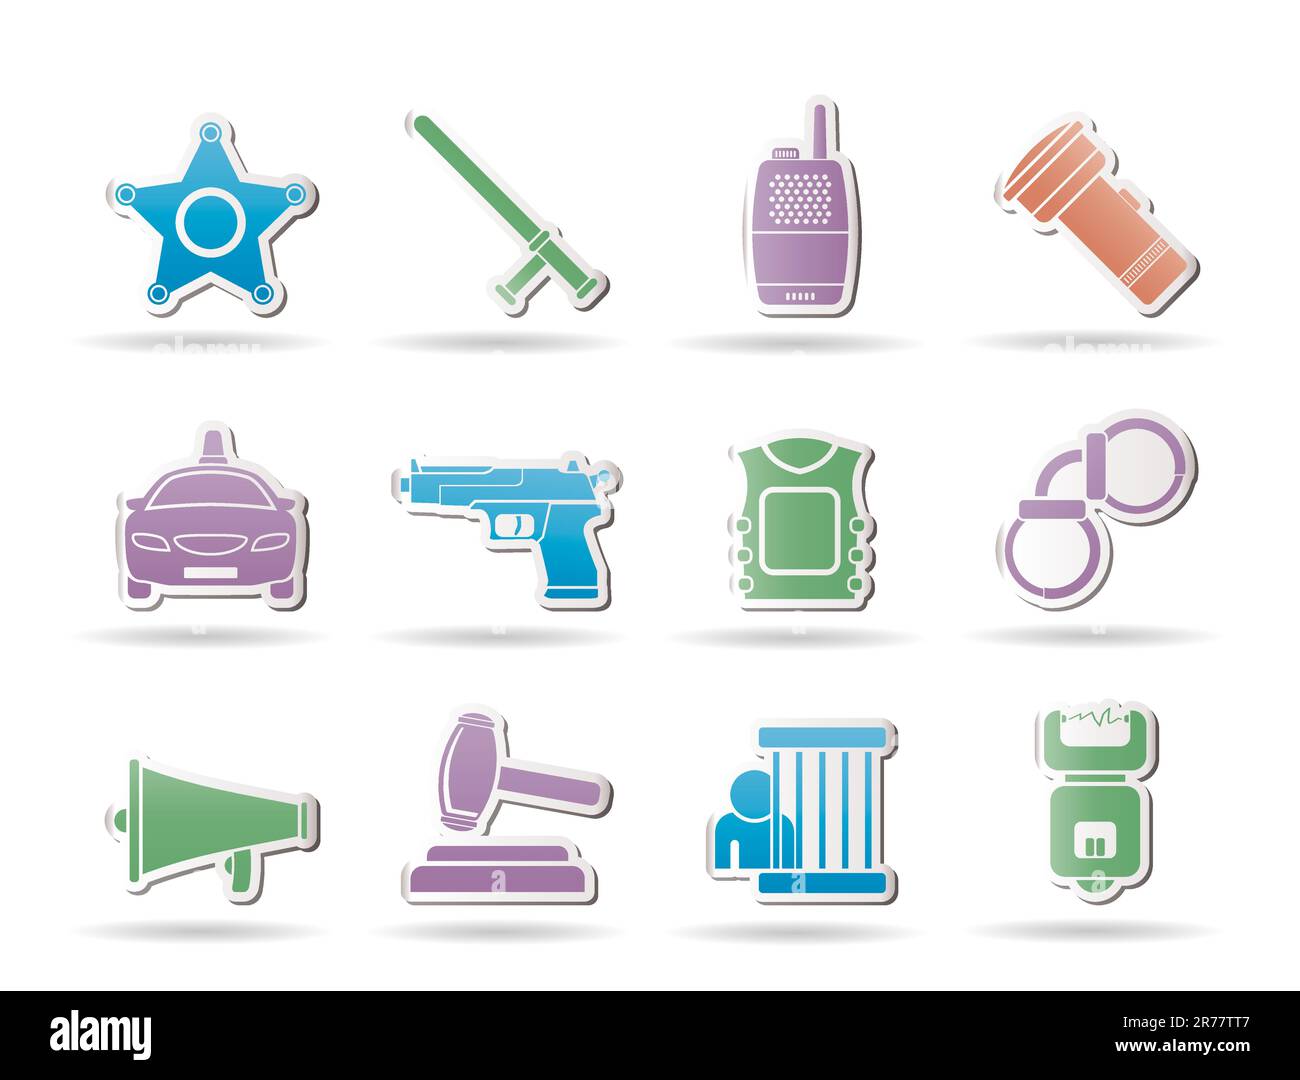 law, order, police and crime icons - vector icon set Stock Vector